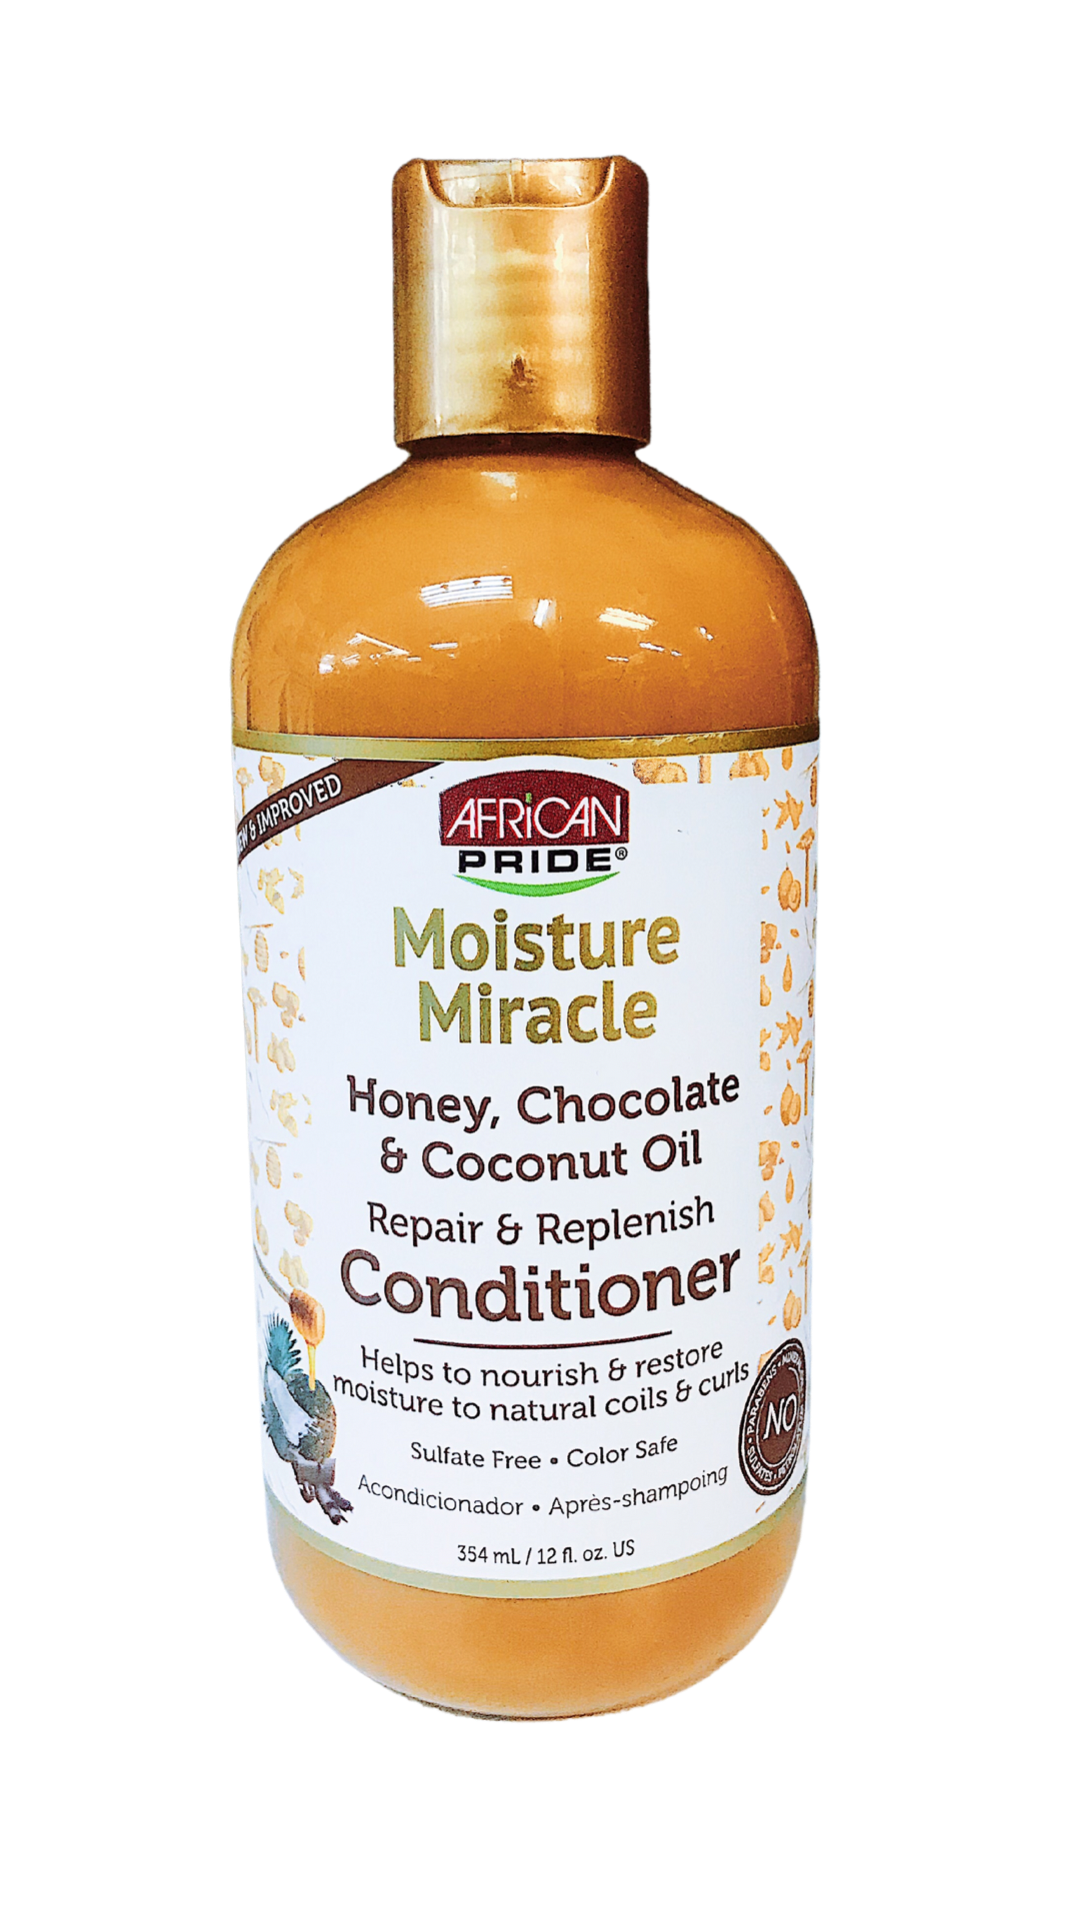 african-pride-moisture-miracle-honey-chocolate-coconut-oil-conditioner.jpg